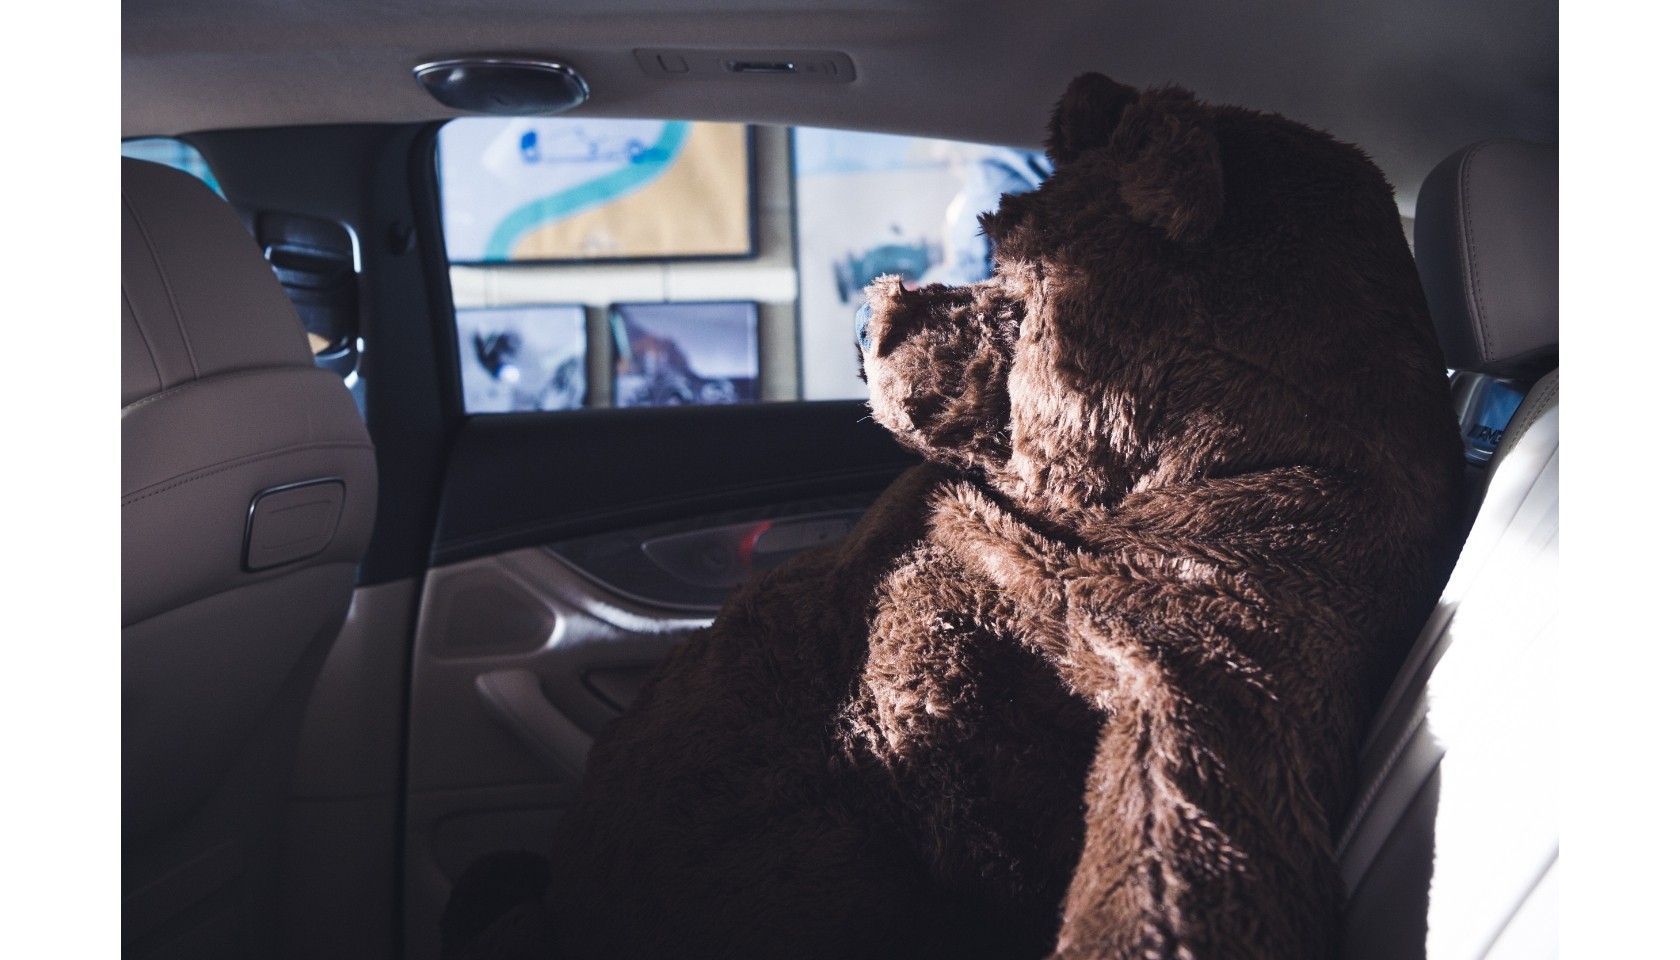 Stuffed Bear from Mercedes-AMG Commercial Starring Lewis Hamilton